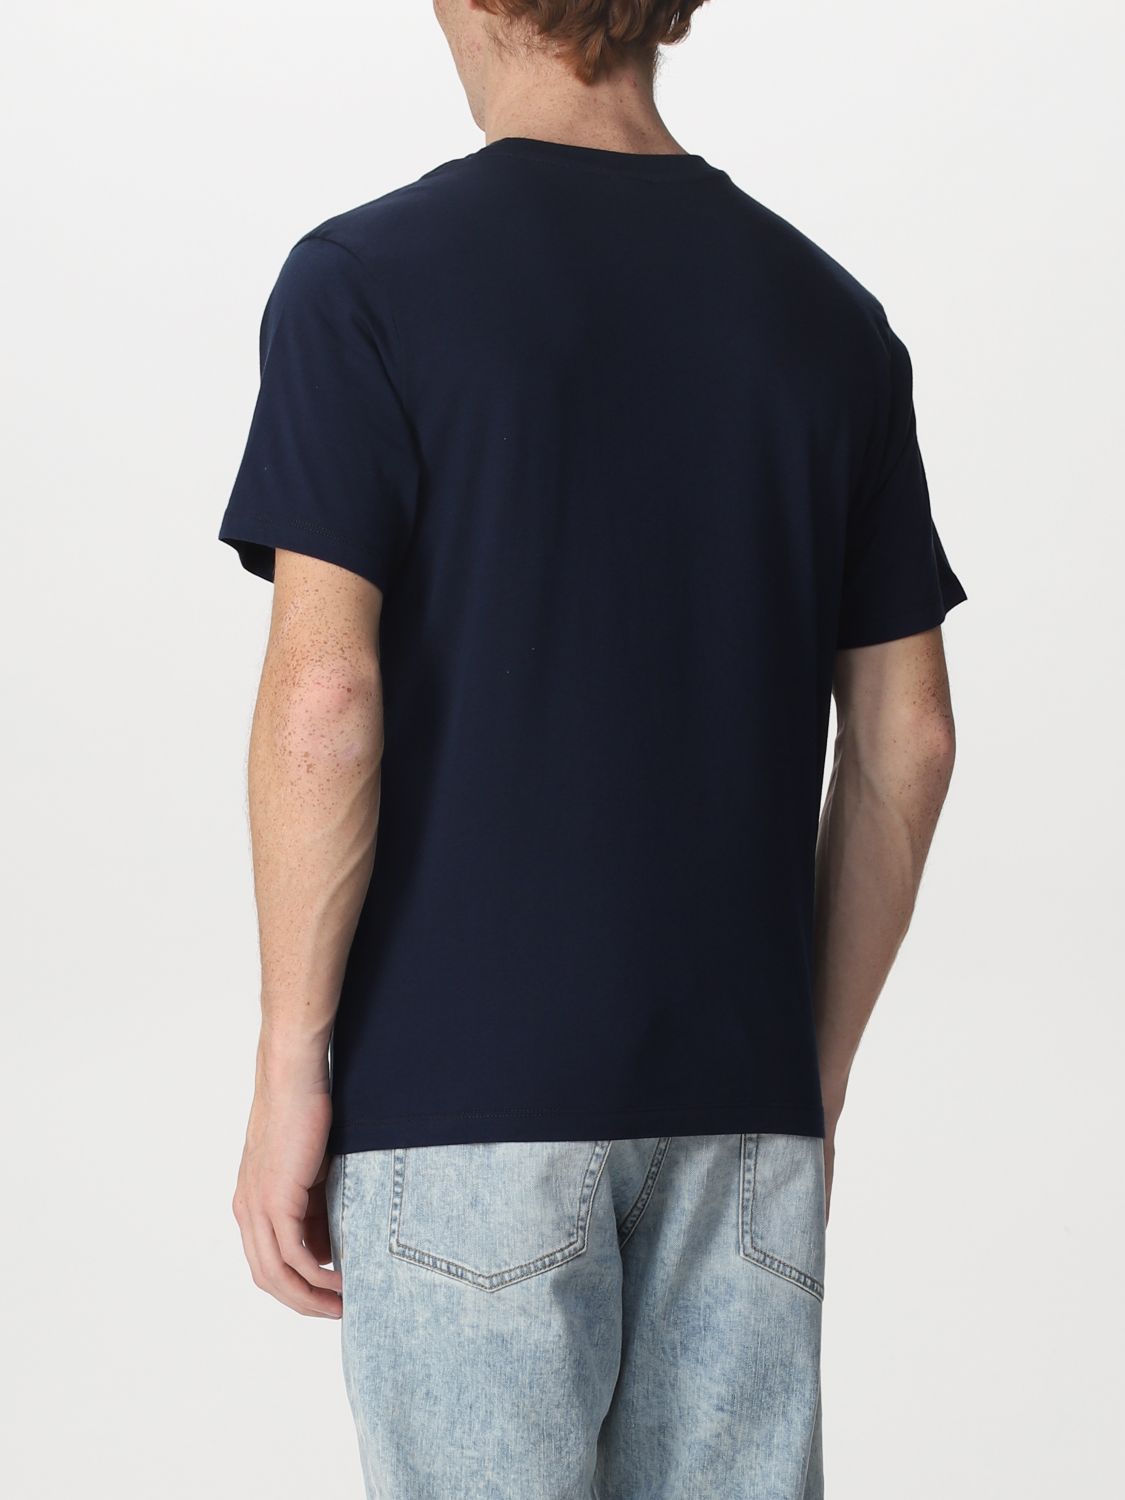 North Sails Outlet: cotton T-shirt with maxi logo - Navy | North Sails ...